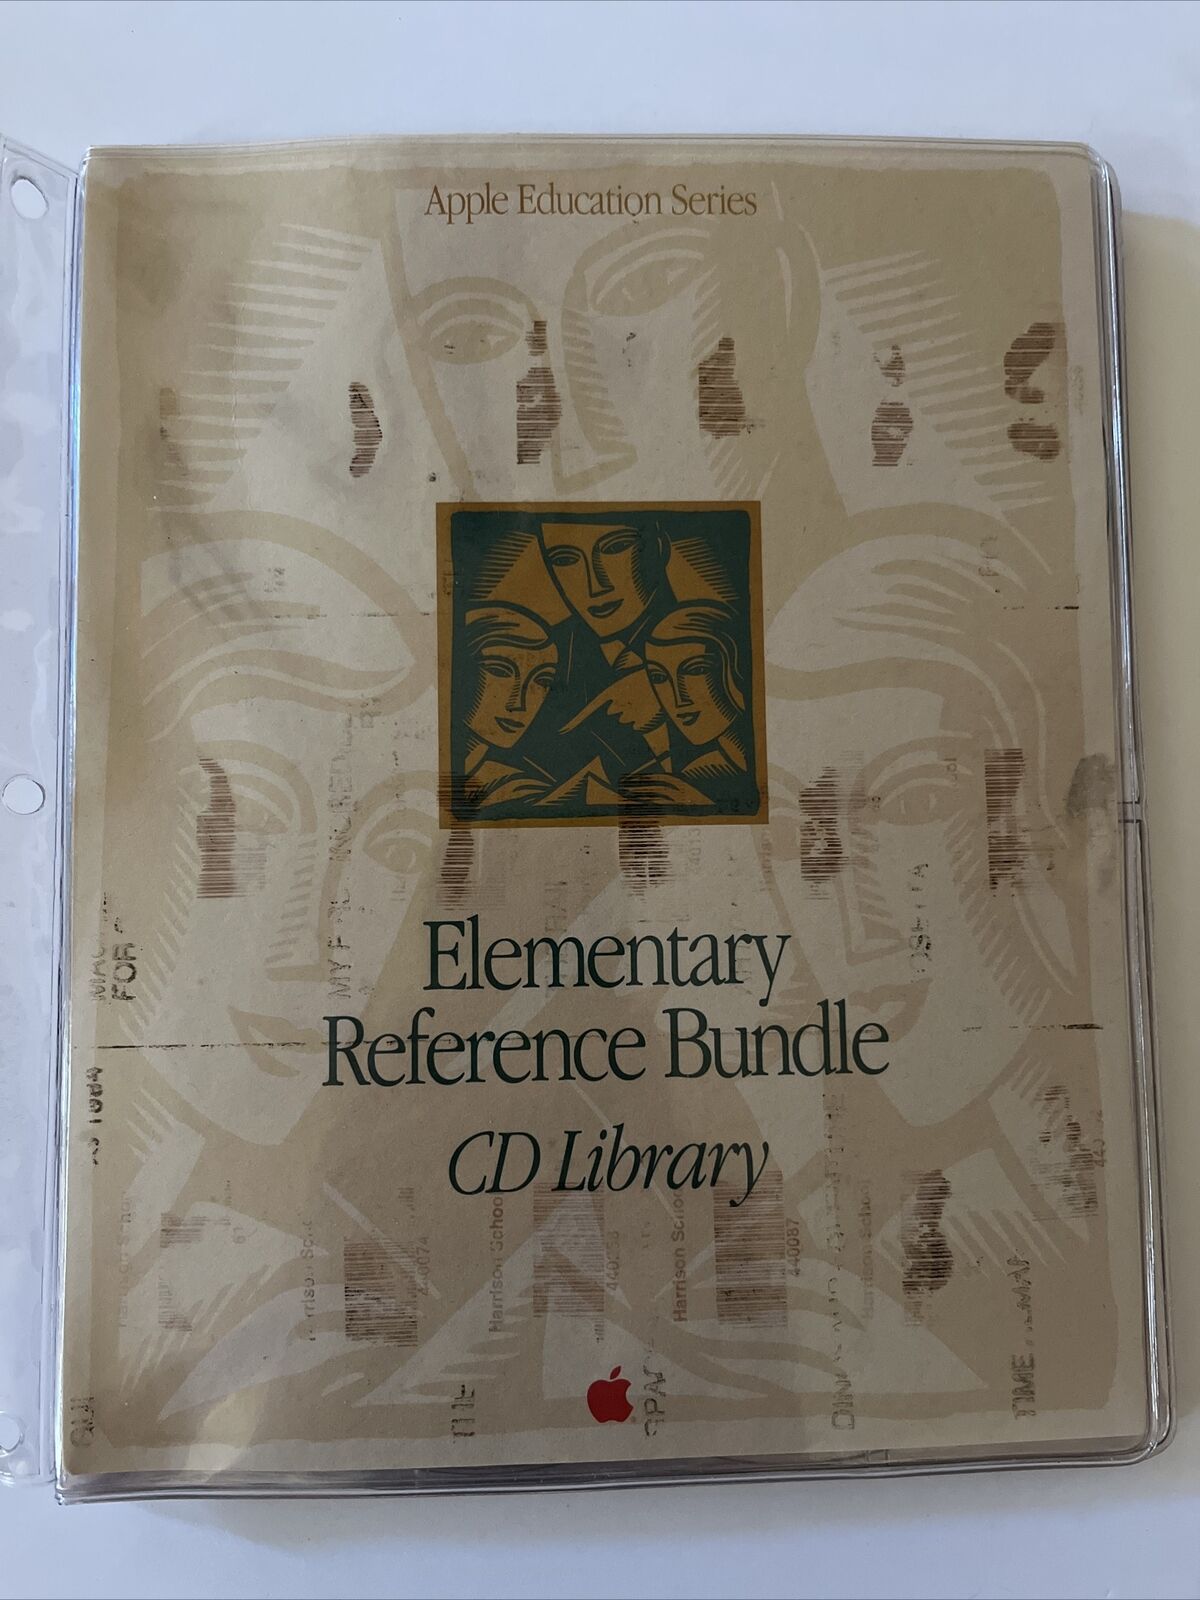 1994 Apple Education Series Elementary Reference Bundle CD Library Macintosh